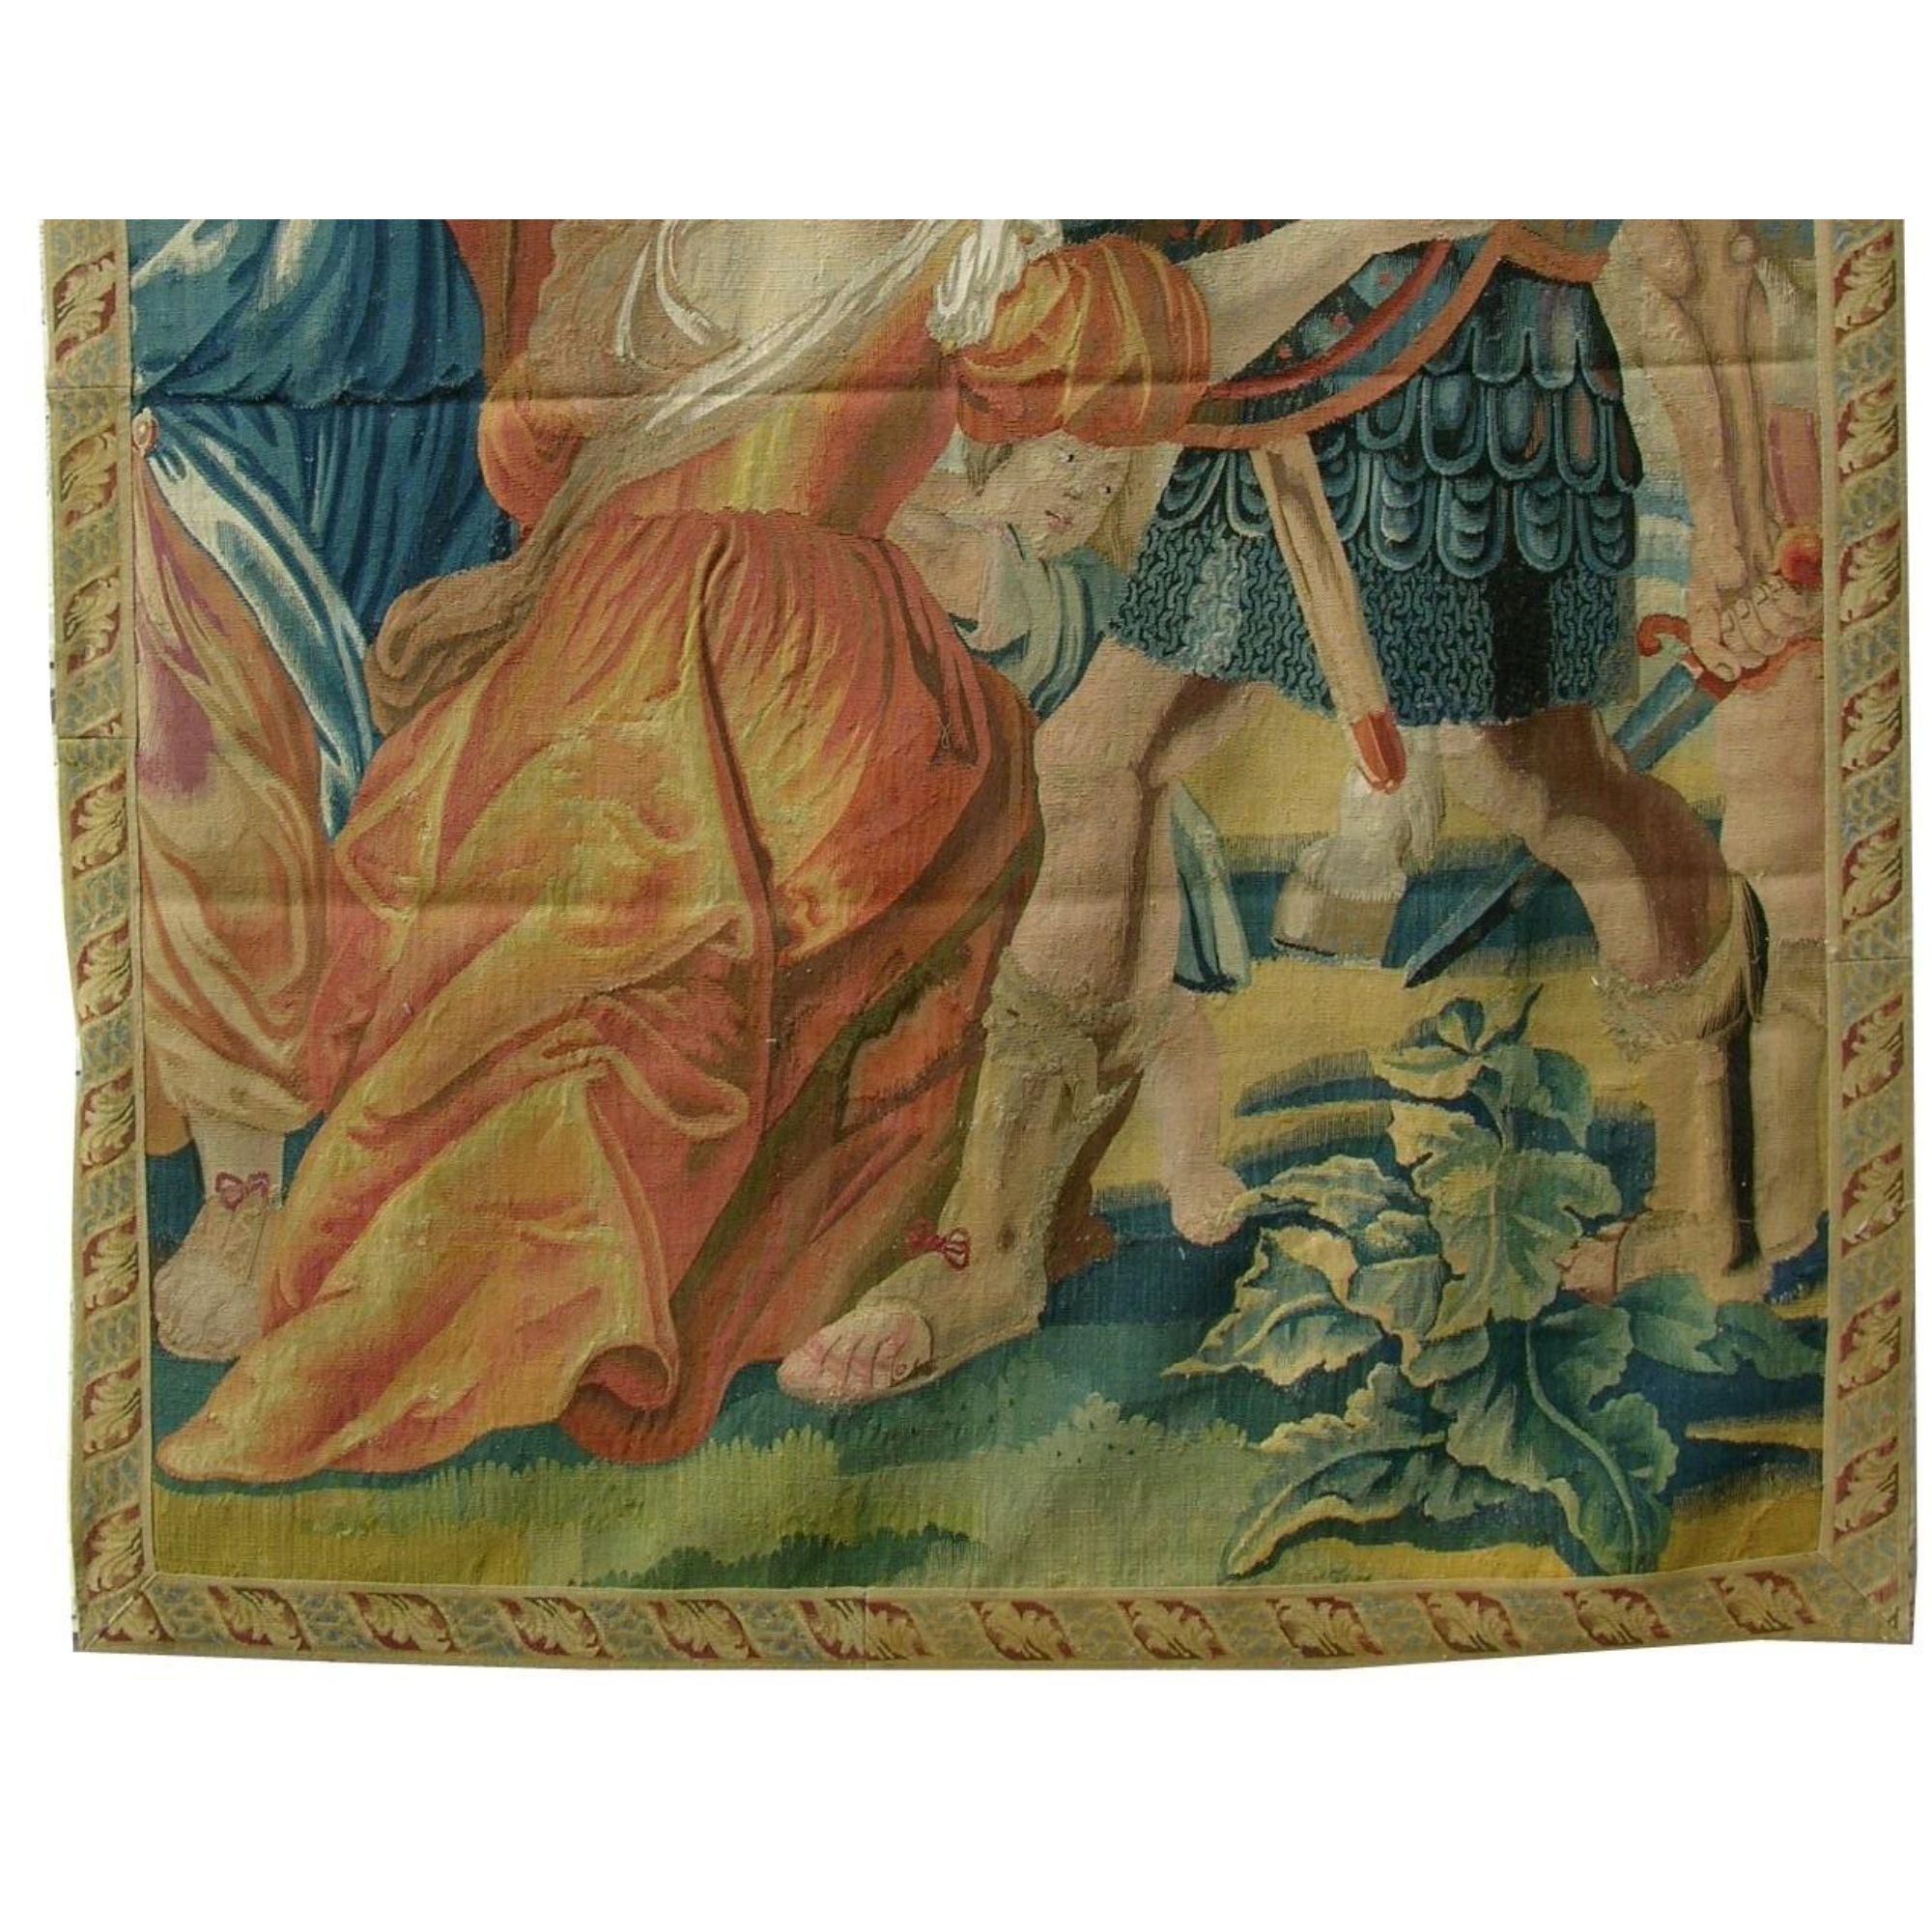 Unknown 17th Century Antique Brussels Tapestry 8'9